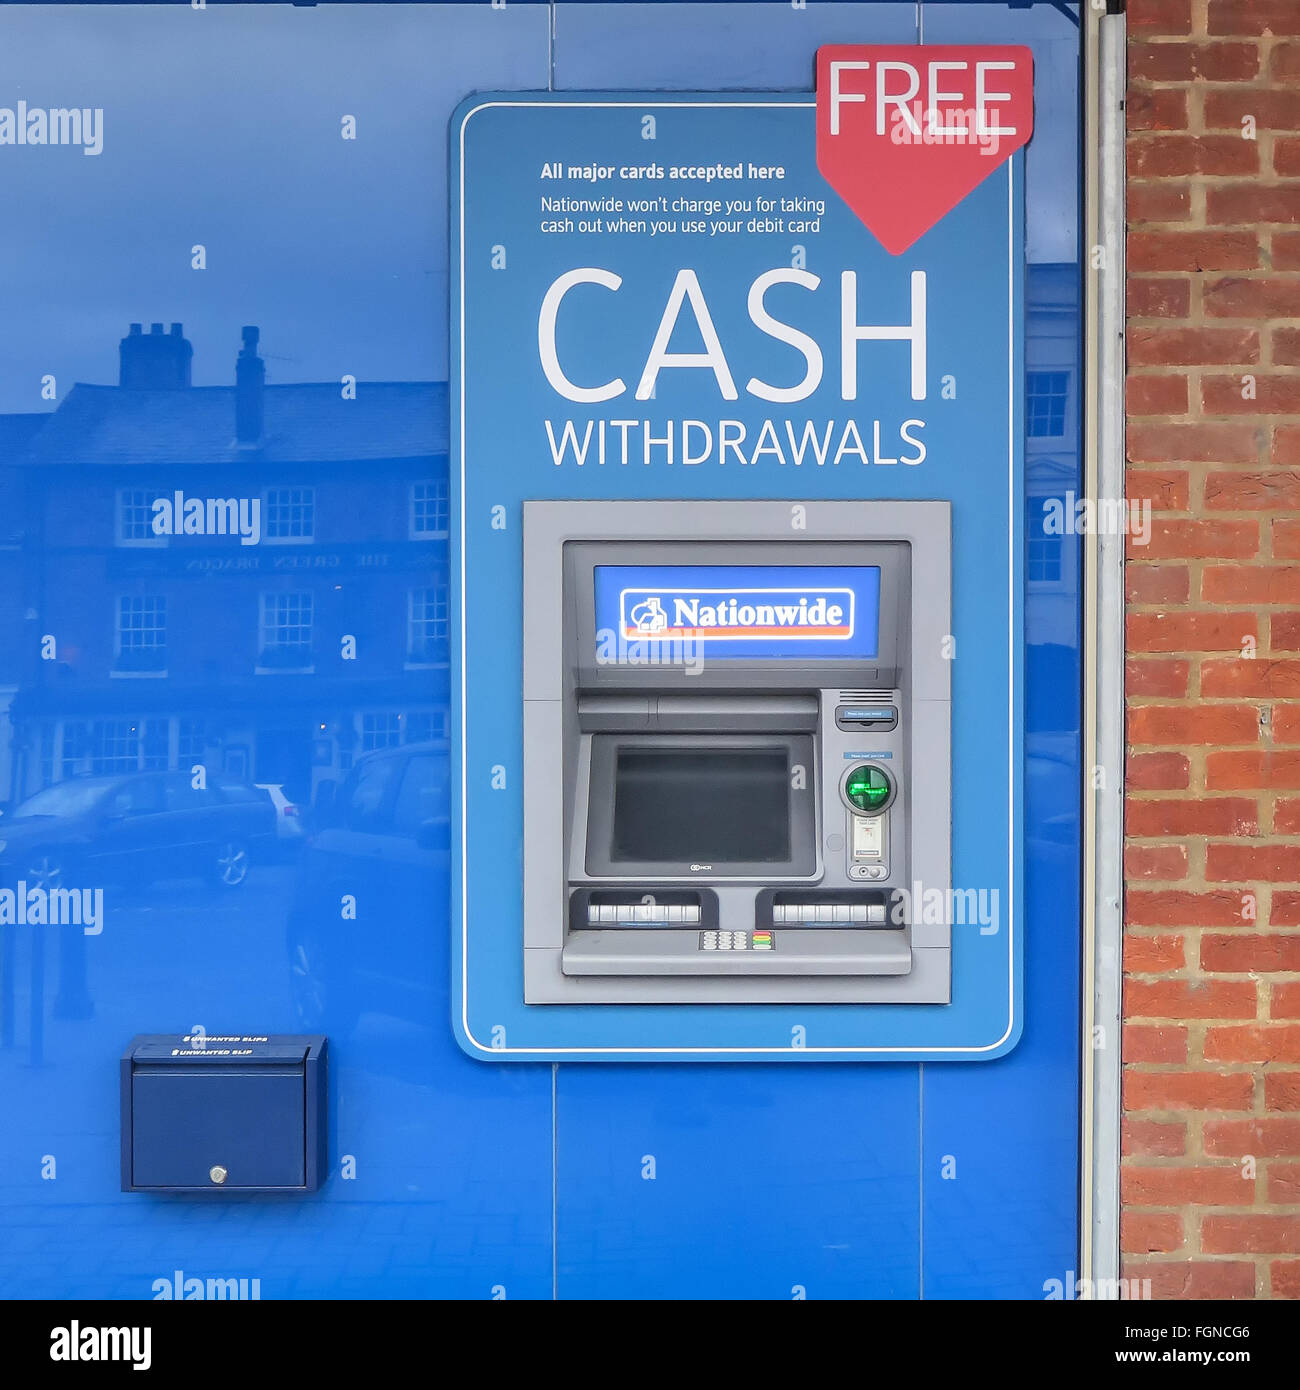 Nationwide Cash Point Stock Photo